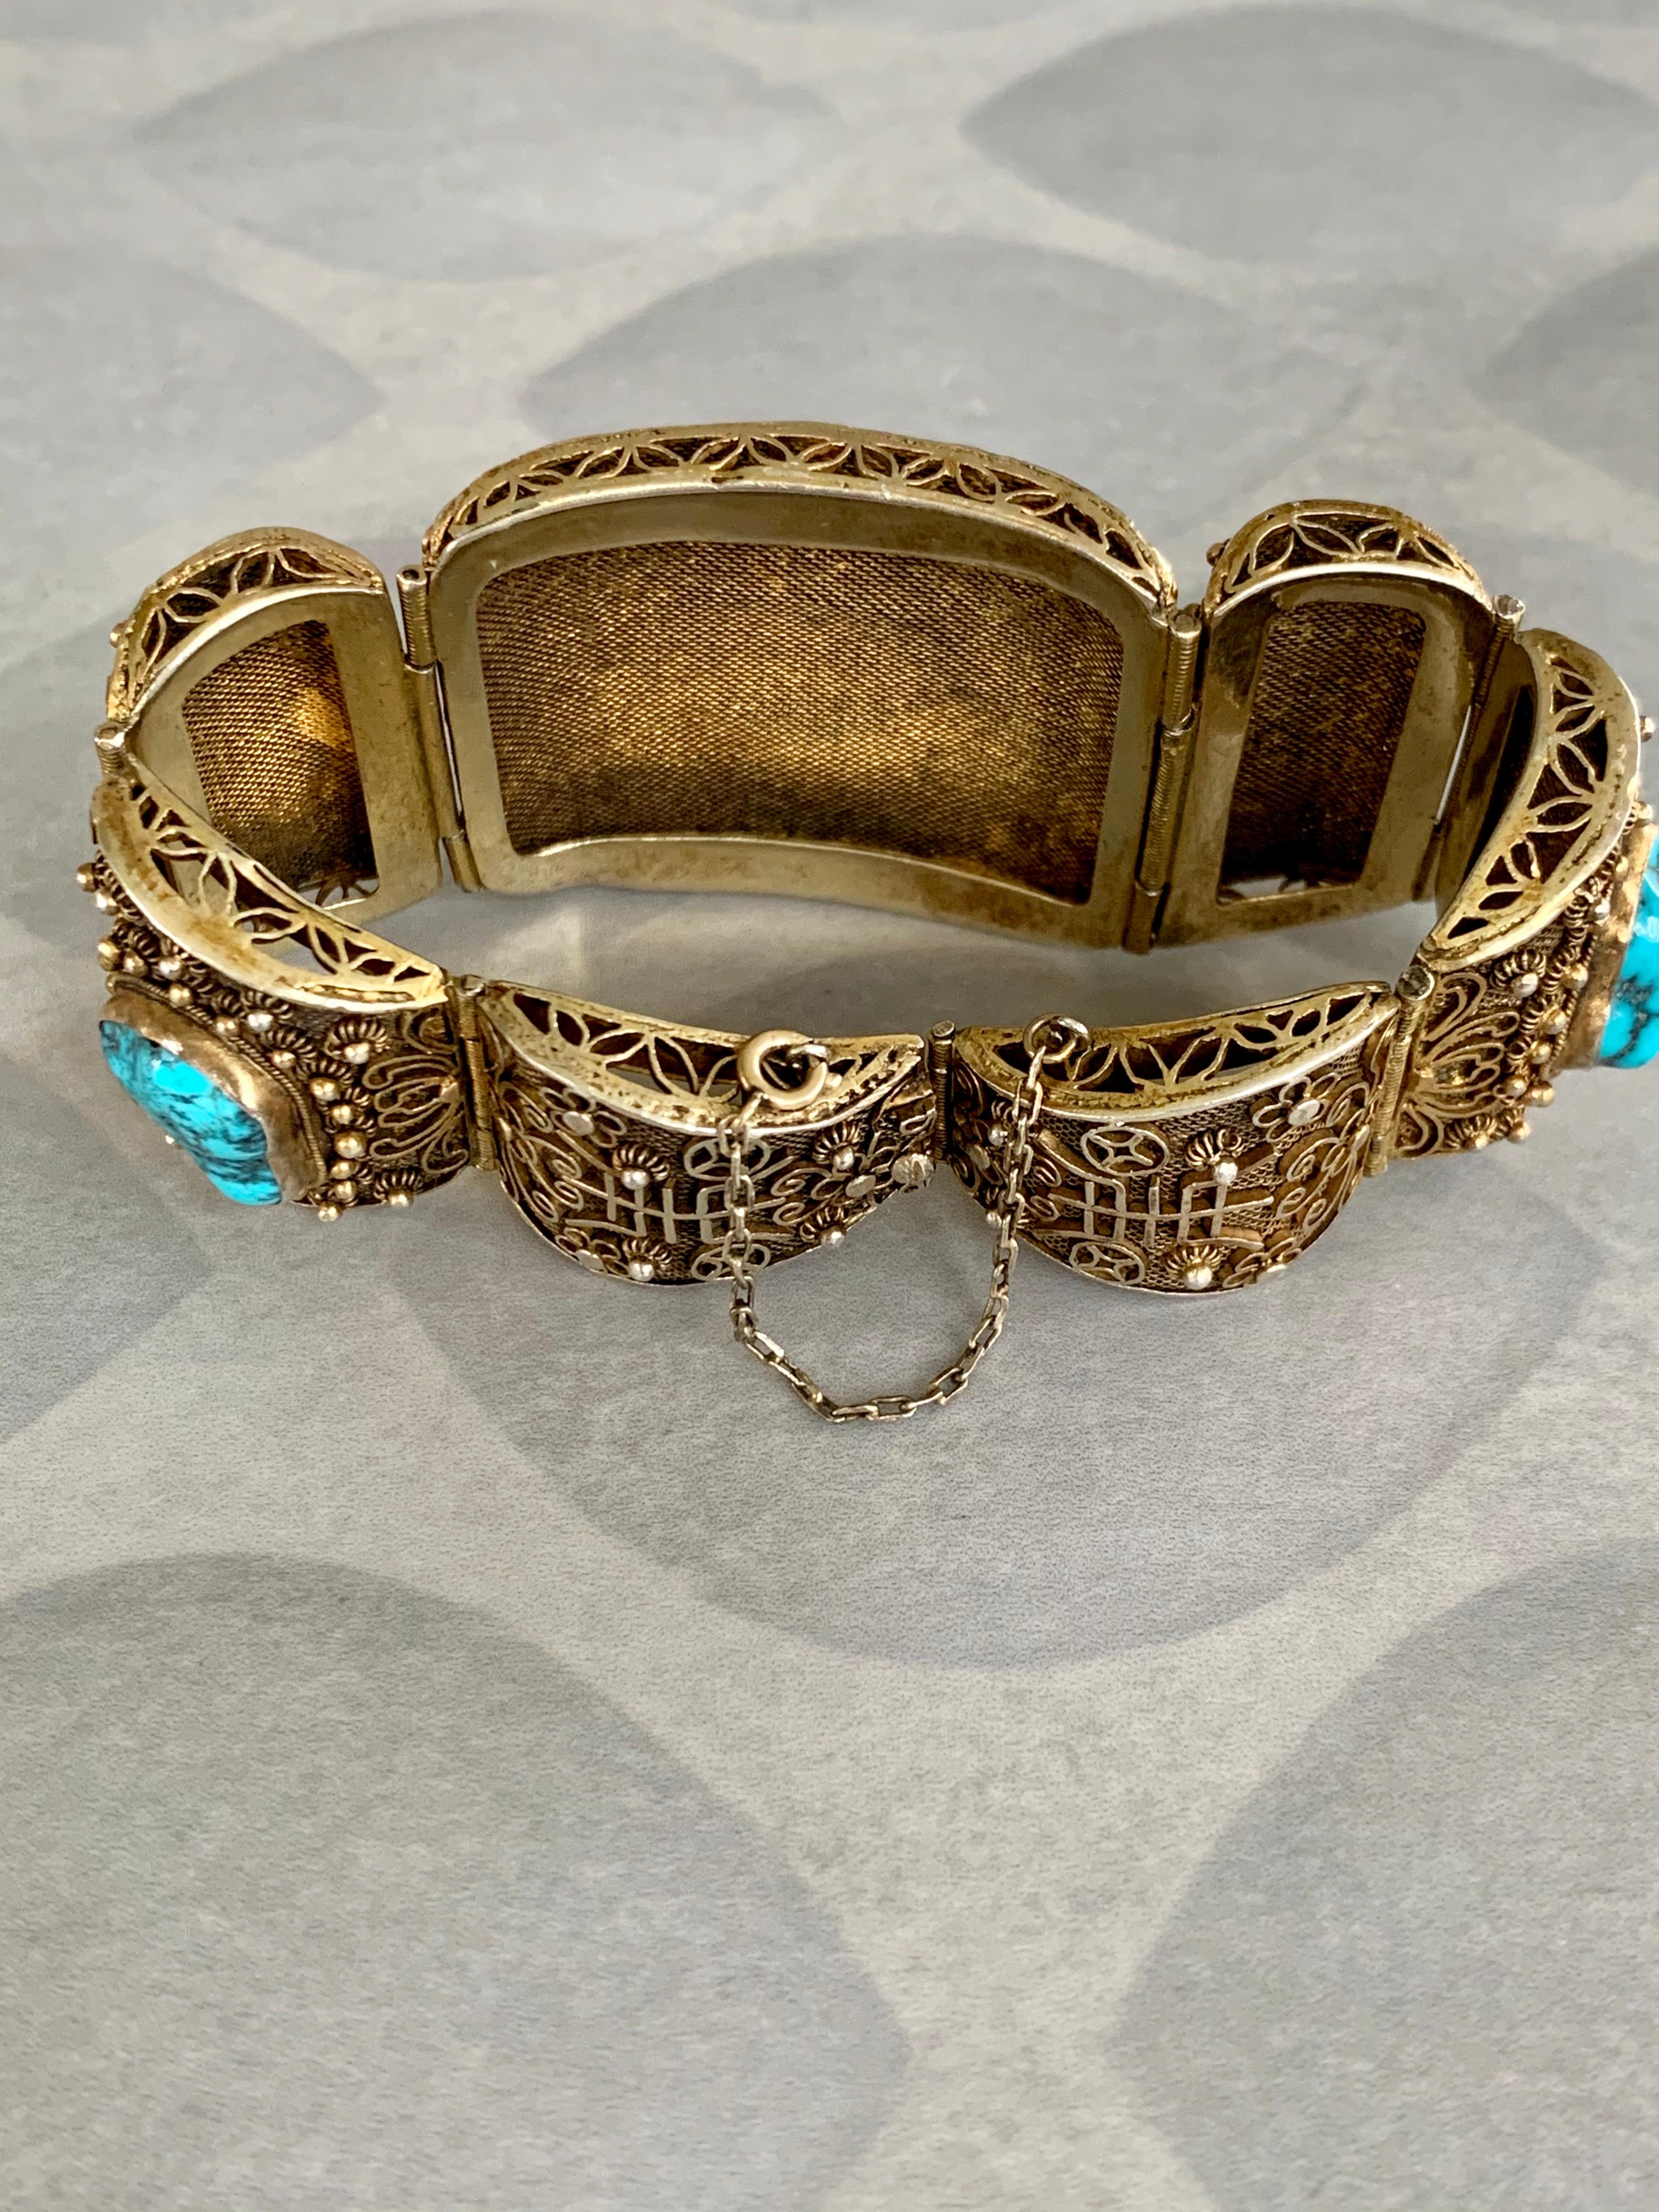 This bracelet is absolutely incredible.  It features seven sections hinged together; five of which have a beautifully veined turquoise stone. The bracelet is Silver which has a Gold wash over it.  The workmanship is very intricate.

Size: 7